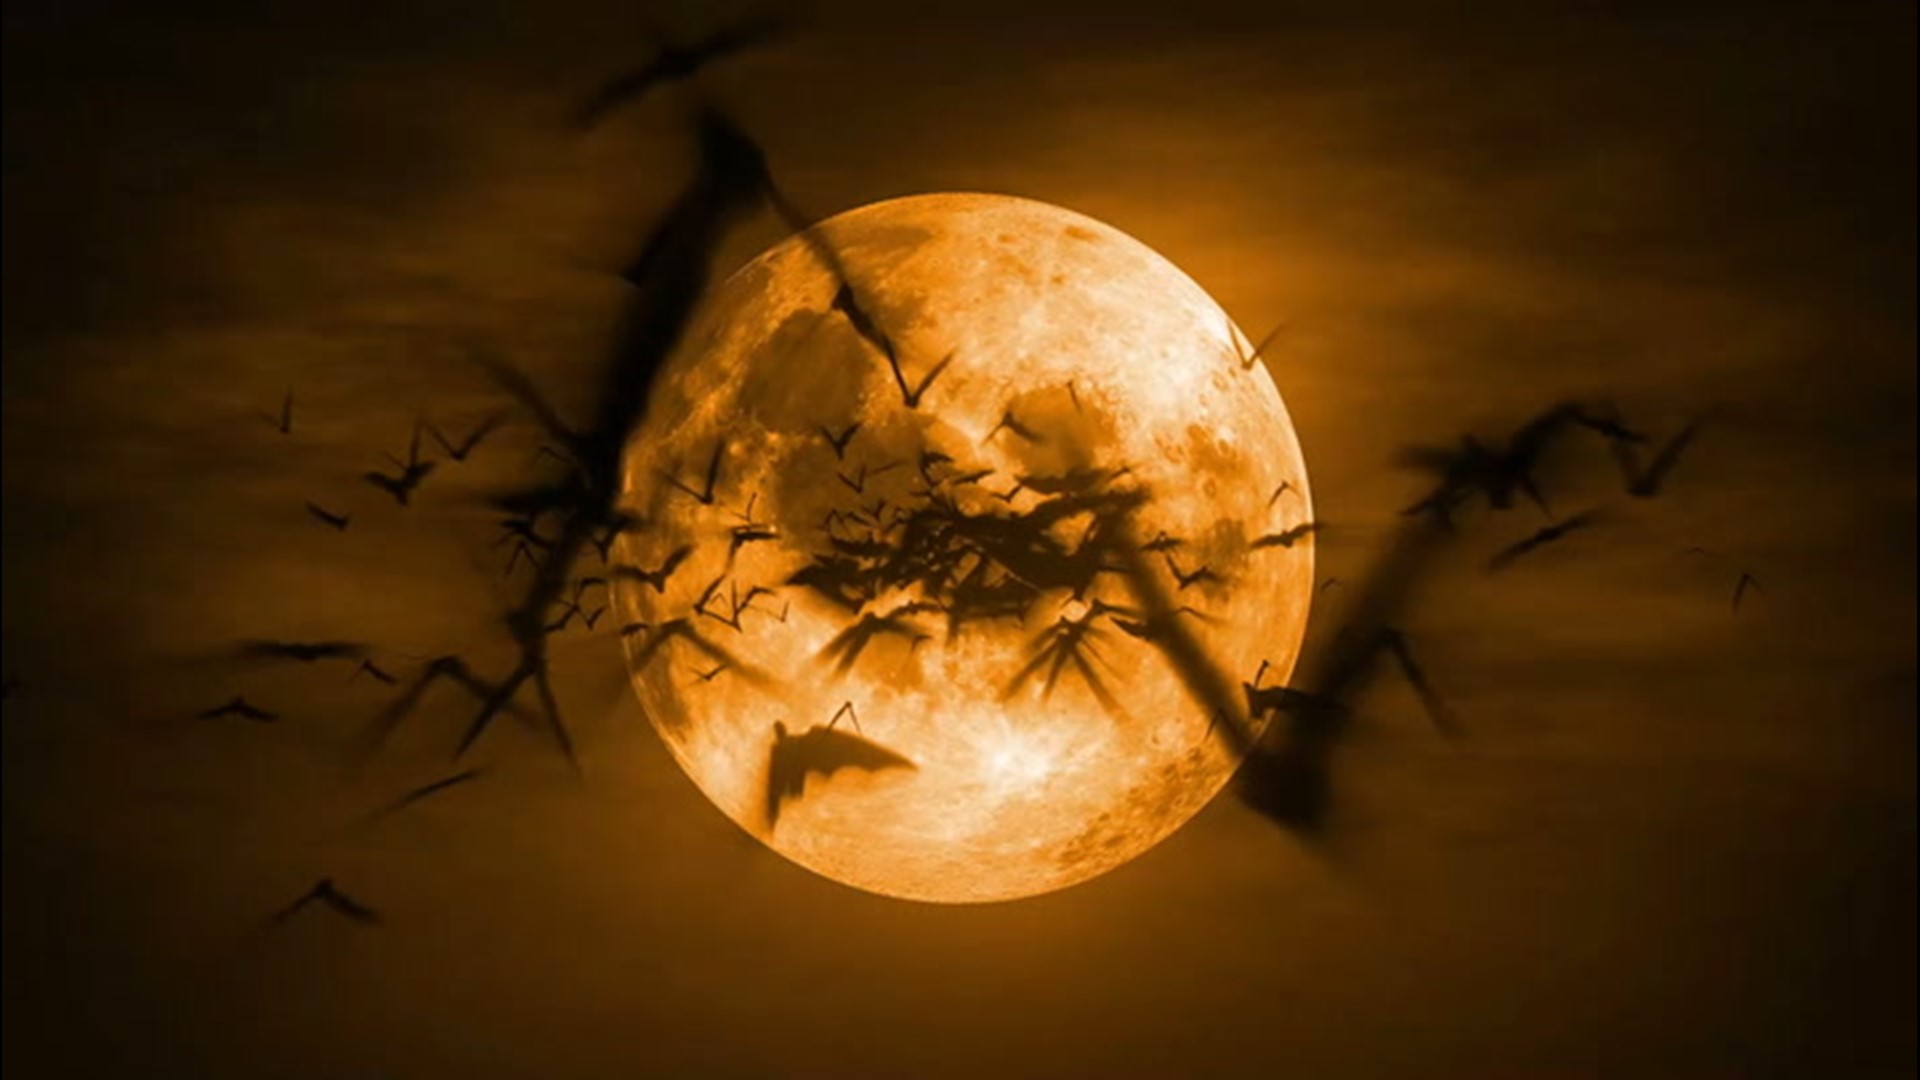 A rare full moon will rise for this year's Halloween giving trick-or-treaters an extra treat for the holiday. The Halloween full moon is also a blue moon.